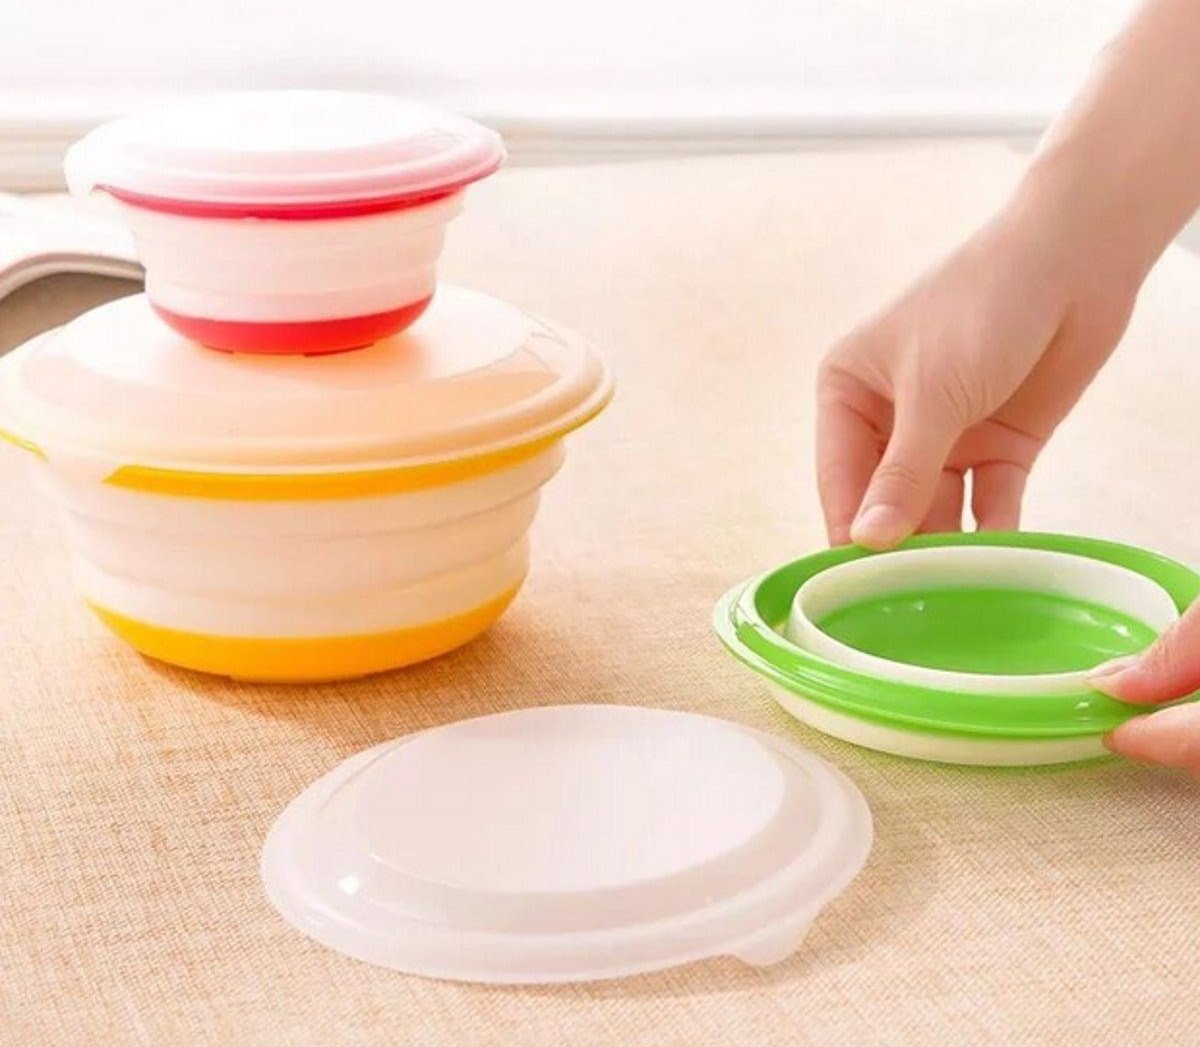 https://meal-prep-gear-shop.myshopify.com/cdn/shop/products/3Pcs-Set-Silicone-Collapsible-Storage-Bowls-Dish-Lids-Stackable-Food-Meal-Prep-Containers-Home-Office-Portable.jpg?v=1513131419